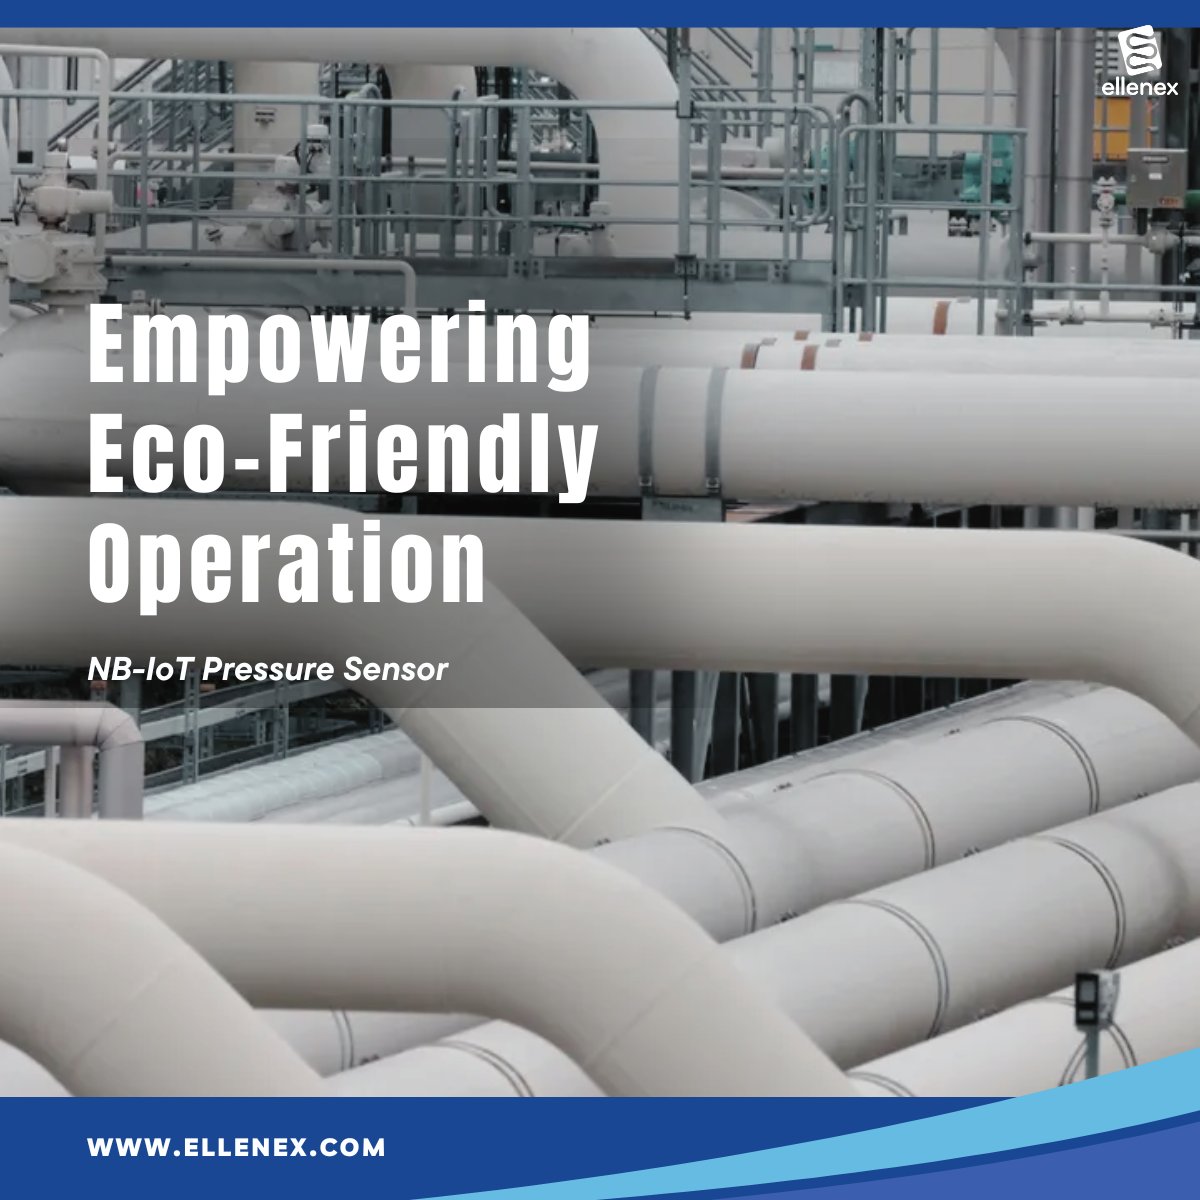 Safeguard natural gas pipelines with NB-IoT! 🌿 Ellenex's sensors offer real-time pressure insights for proactive maintenance and sustainable resource management. #IoT #Safety #Monitoring #Technology #EnergyEfficiency #RemoteMonitoring #Gas #Sustainable